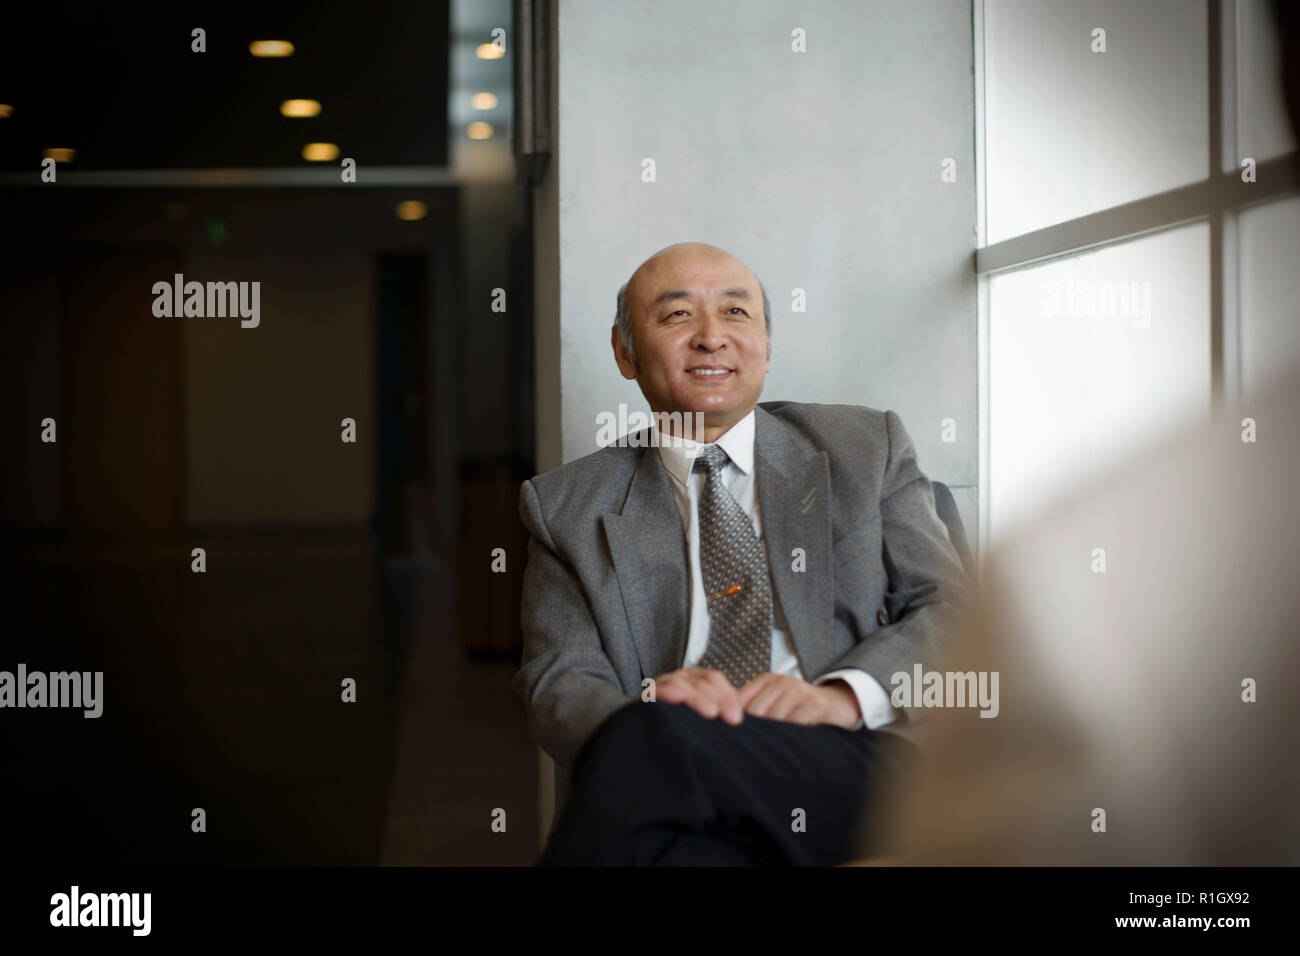 Senior adult man sitting in a room. Stock Photo